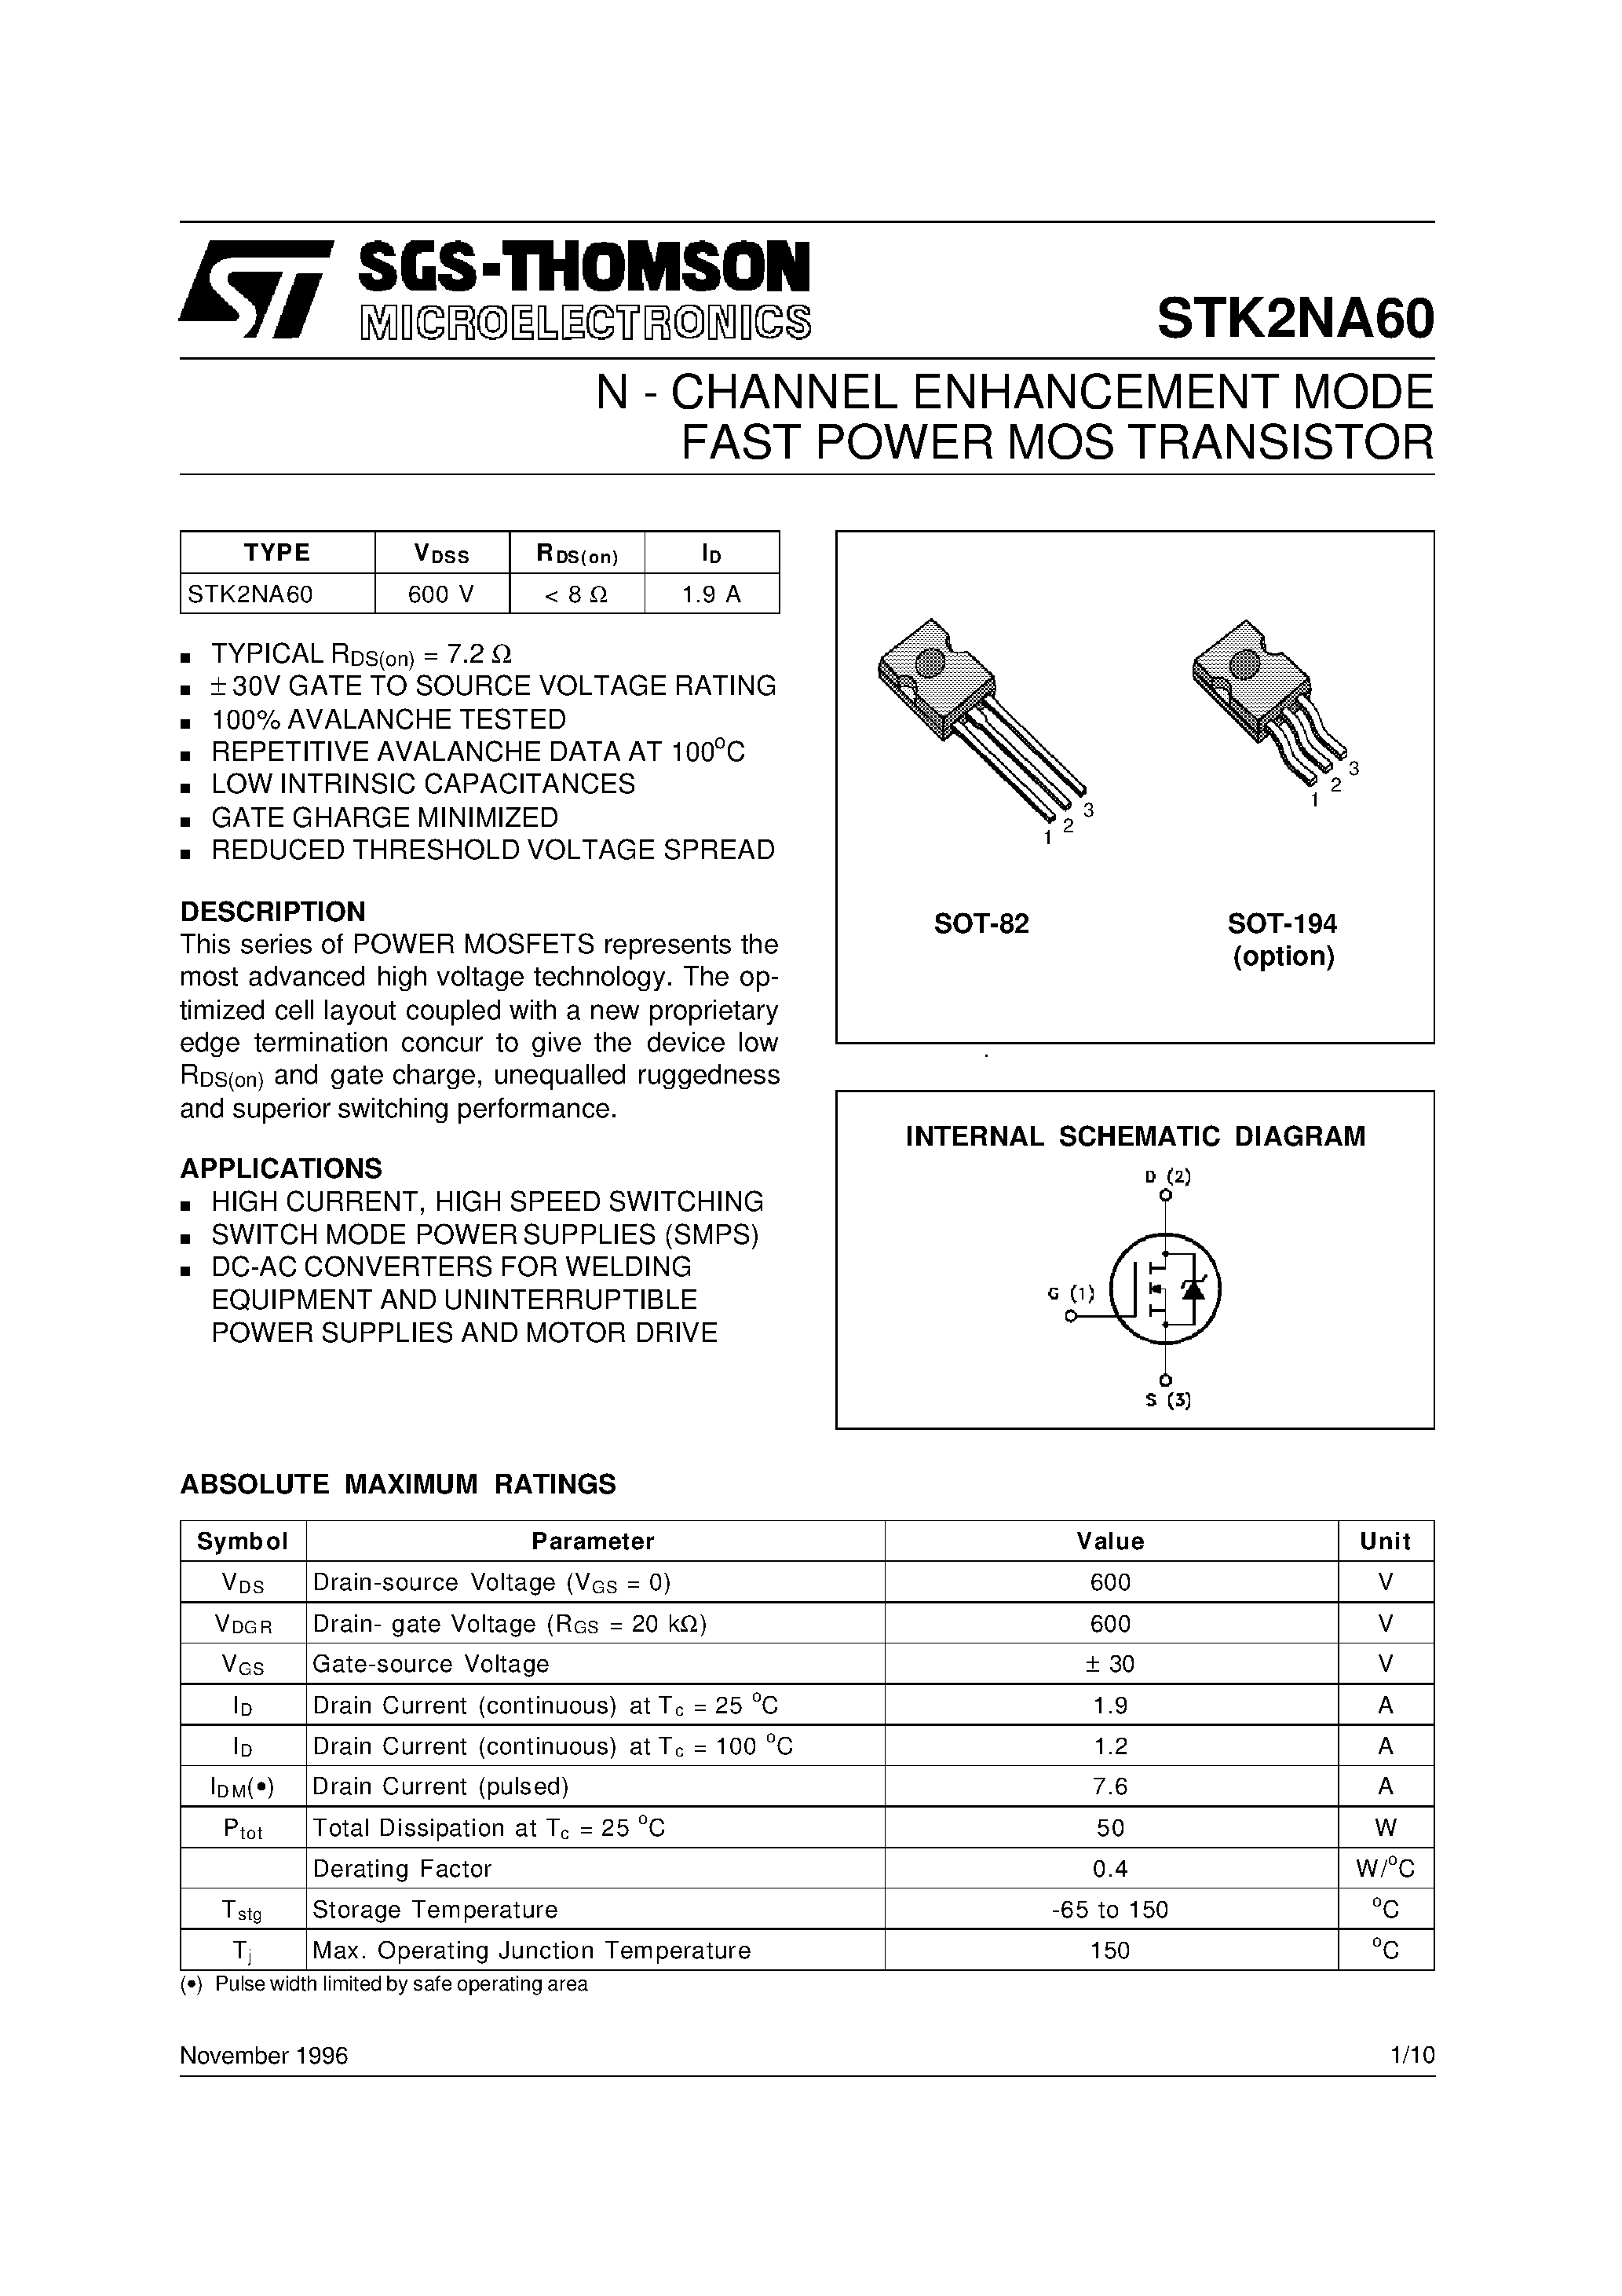 Datasheet STK2NA60 - N - CHANNEL ENHANCEMENT MODE FAST POWER MOS TRANSISTOR page 1